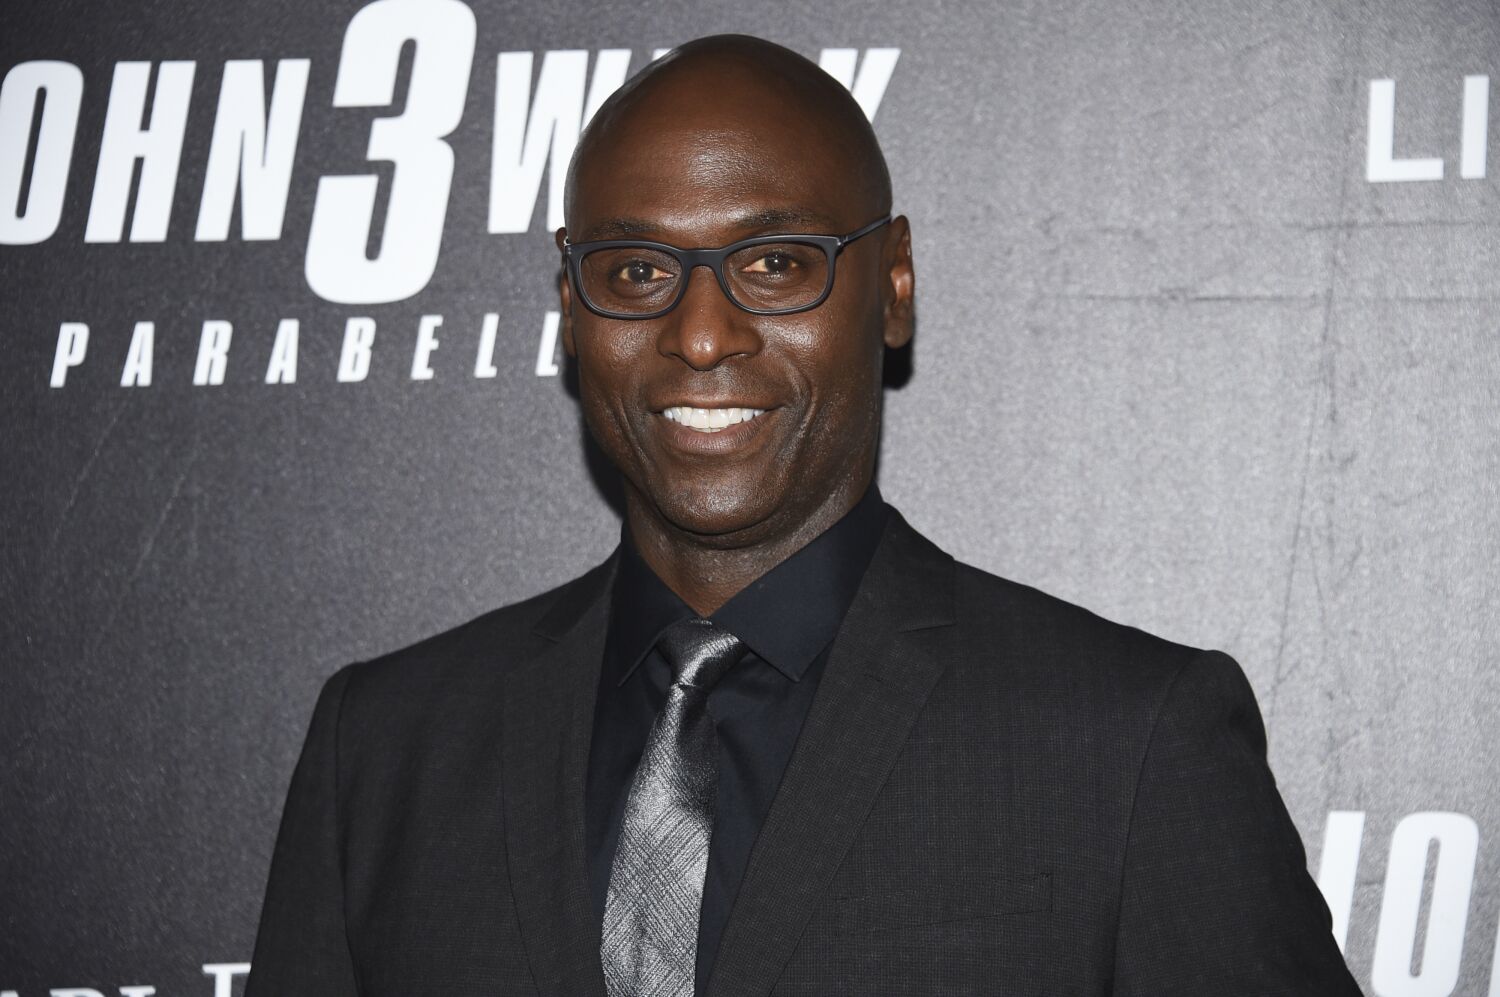 'Actor's actor' Lance Reddick completed work on at least 4 unreleased projects before death